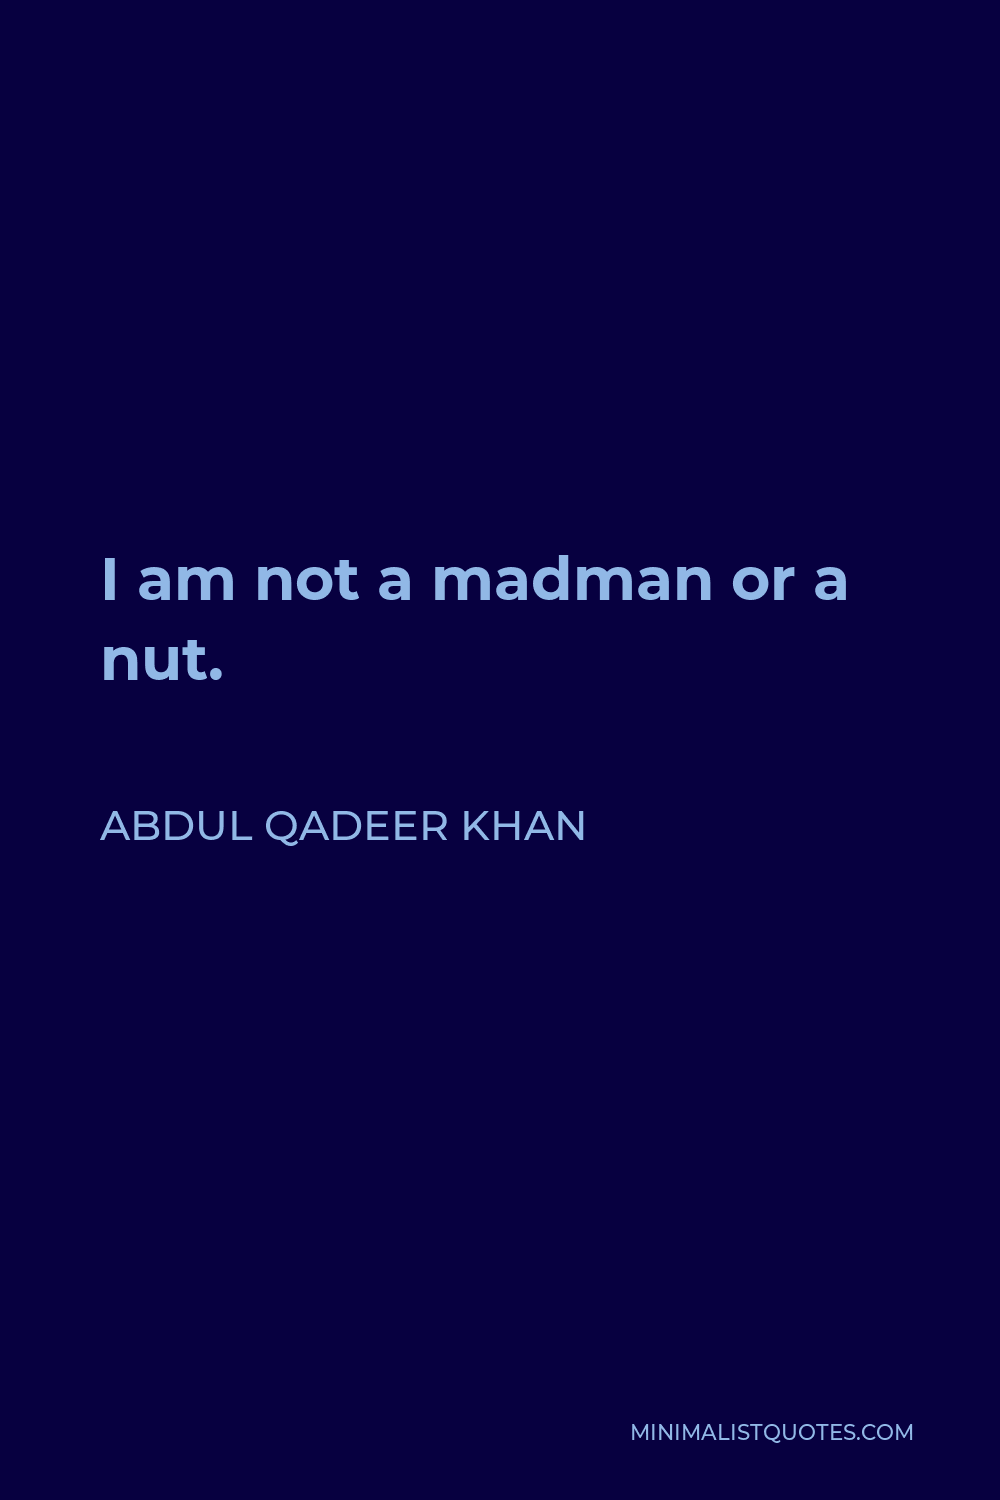 Abdul Qadeer Khan Quote - I am not a madman or a nut.